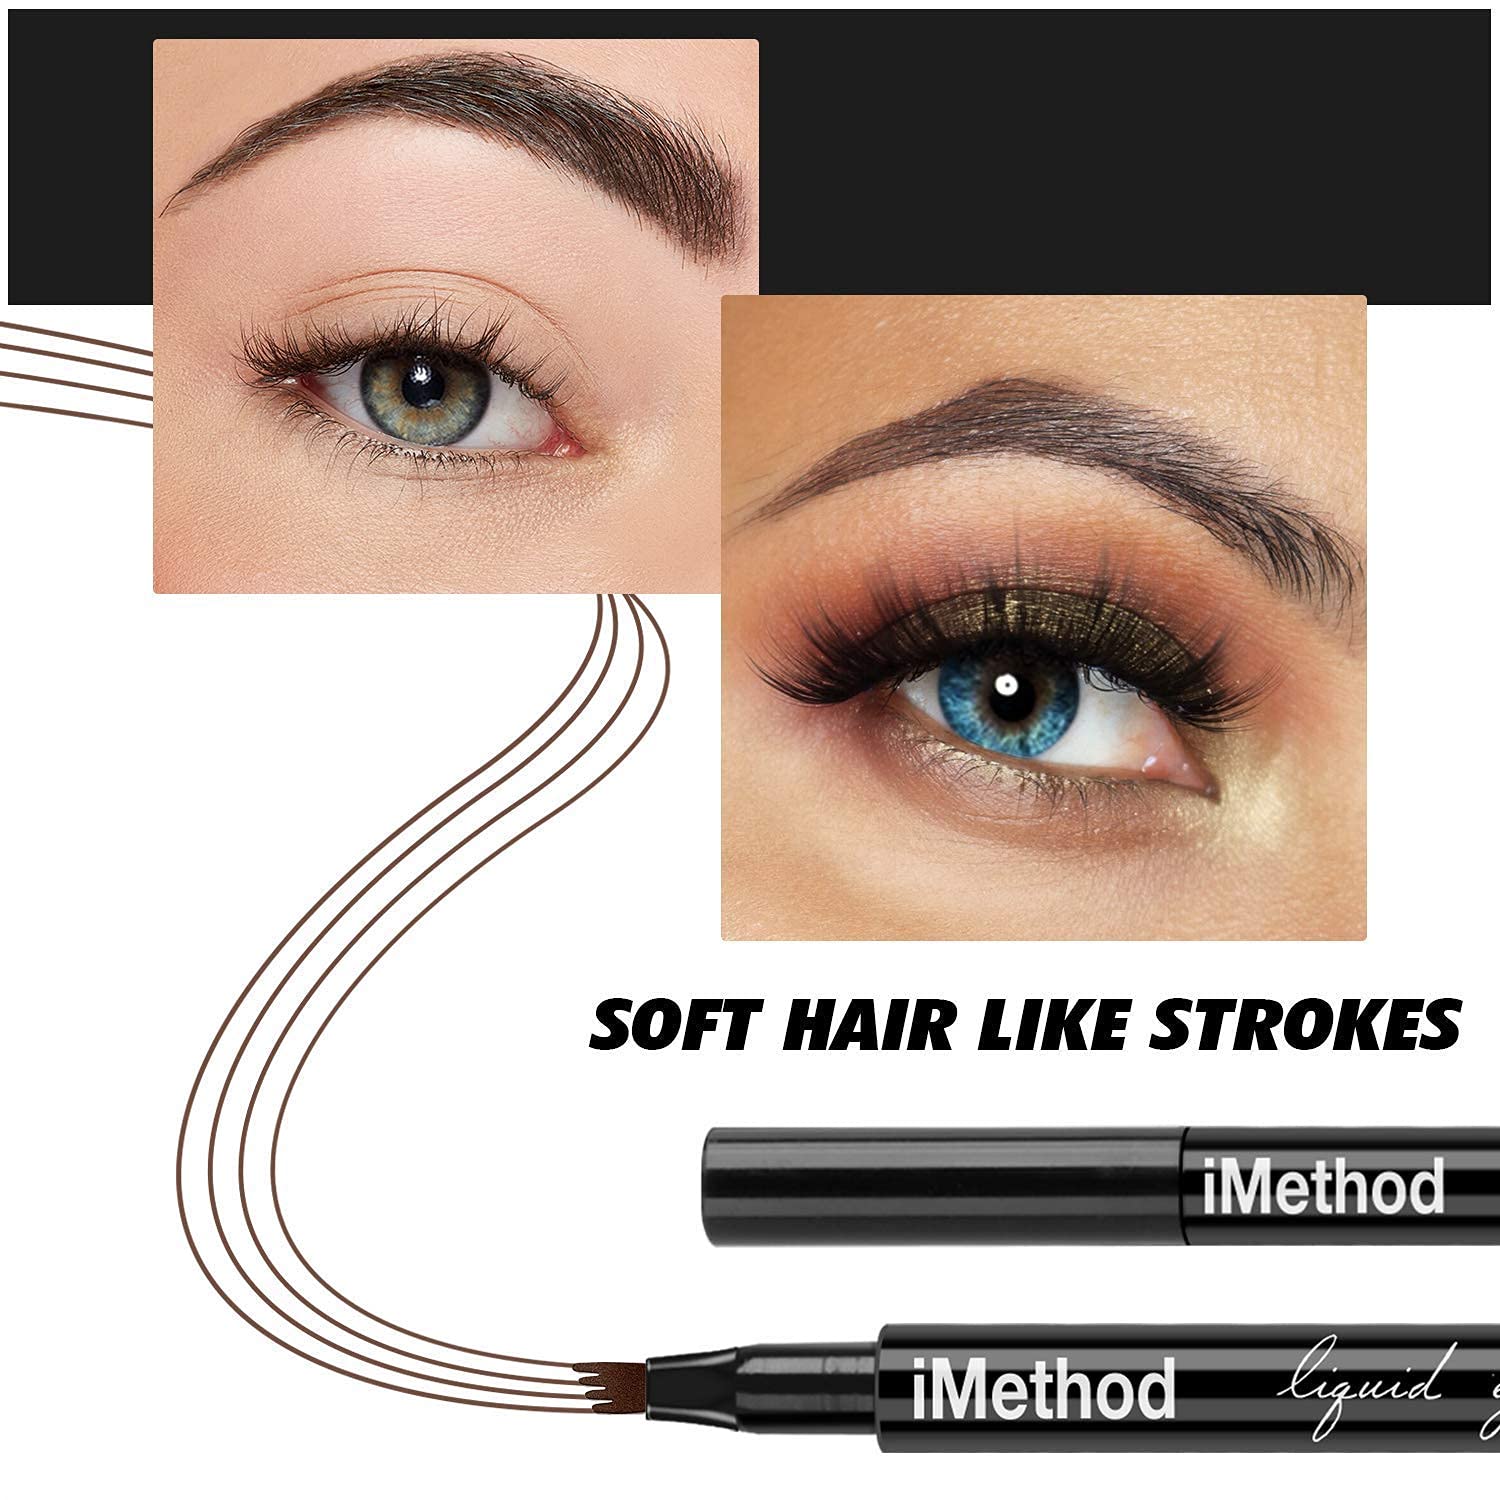 iMethod Eyebrow Pen - iMethod Eye Brown Makeup, Eyebrow Pencil with a Micro-Fork Tip Applicator Creates Natural Looking Brows Effortlessly and Stays on All Day, Dark Brown